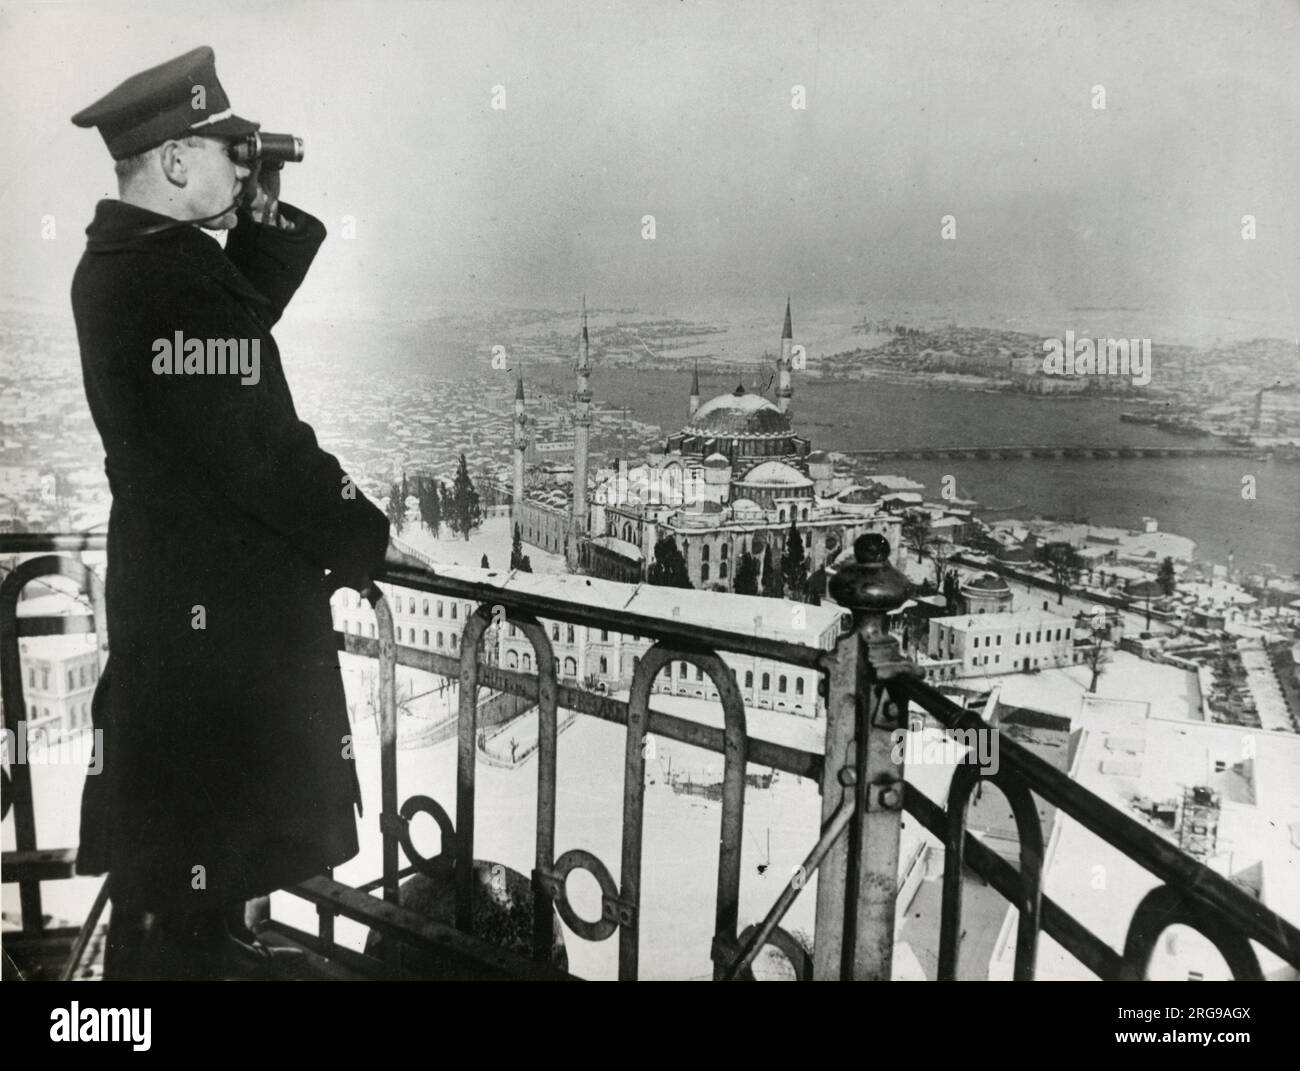 Istanbul Modern Fire Department, Turkey - High above the snow-covered city, a member of the Fire Brigade keeps watch day and night for possible fires.Keeping watch Stock Photo